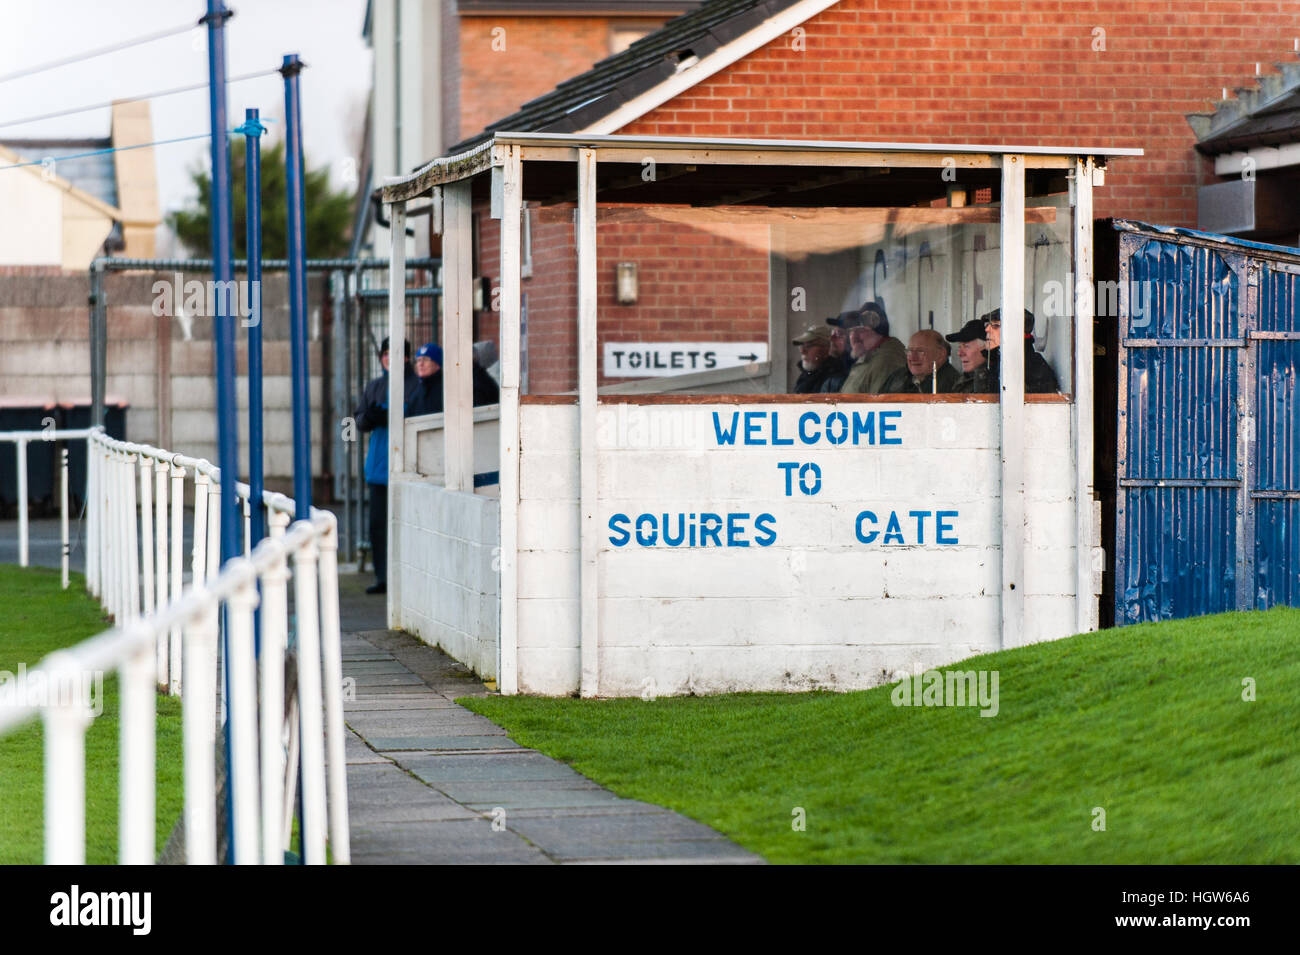 Small spectator stand at Squires Gate FC, of the North West Counties League Premier division, Squires Gate, Blackpool, UK. Stock Photo